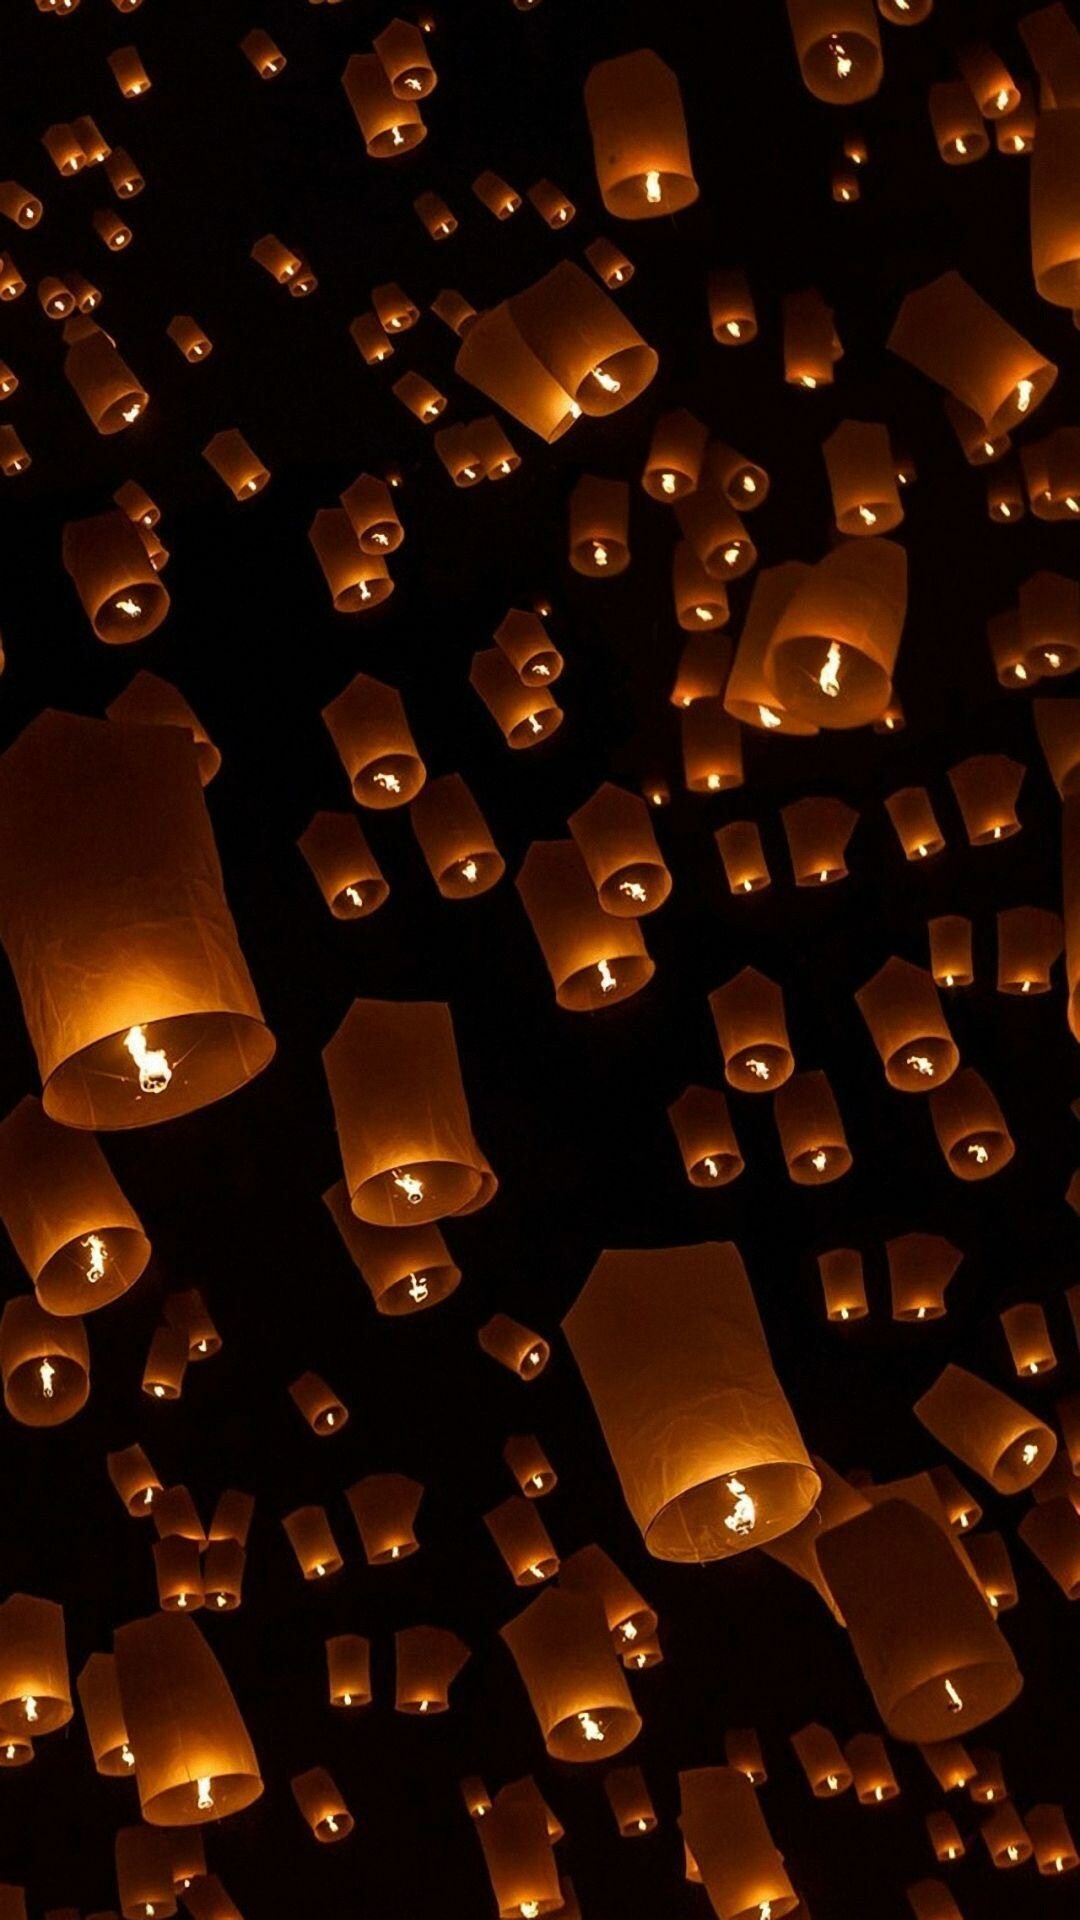 Lanterns: Can be used for signaling, as torches, or as light-sources outdoors. 1080x1920 Full HD Wallpaper.